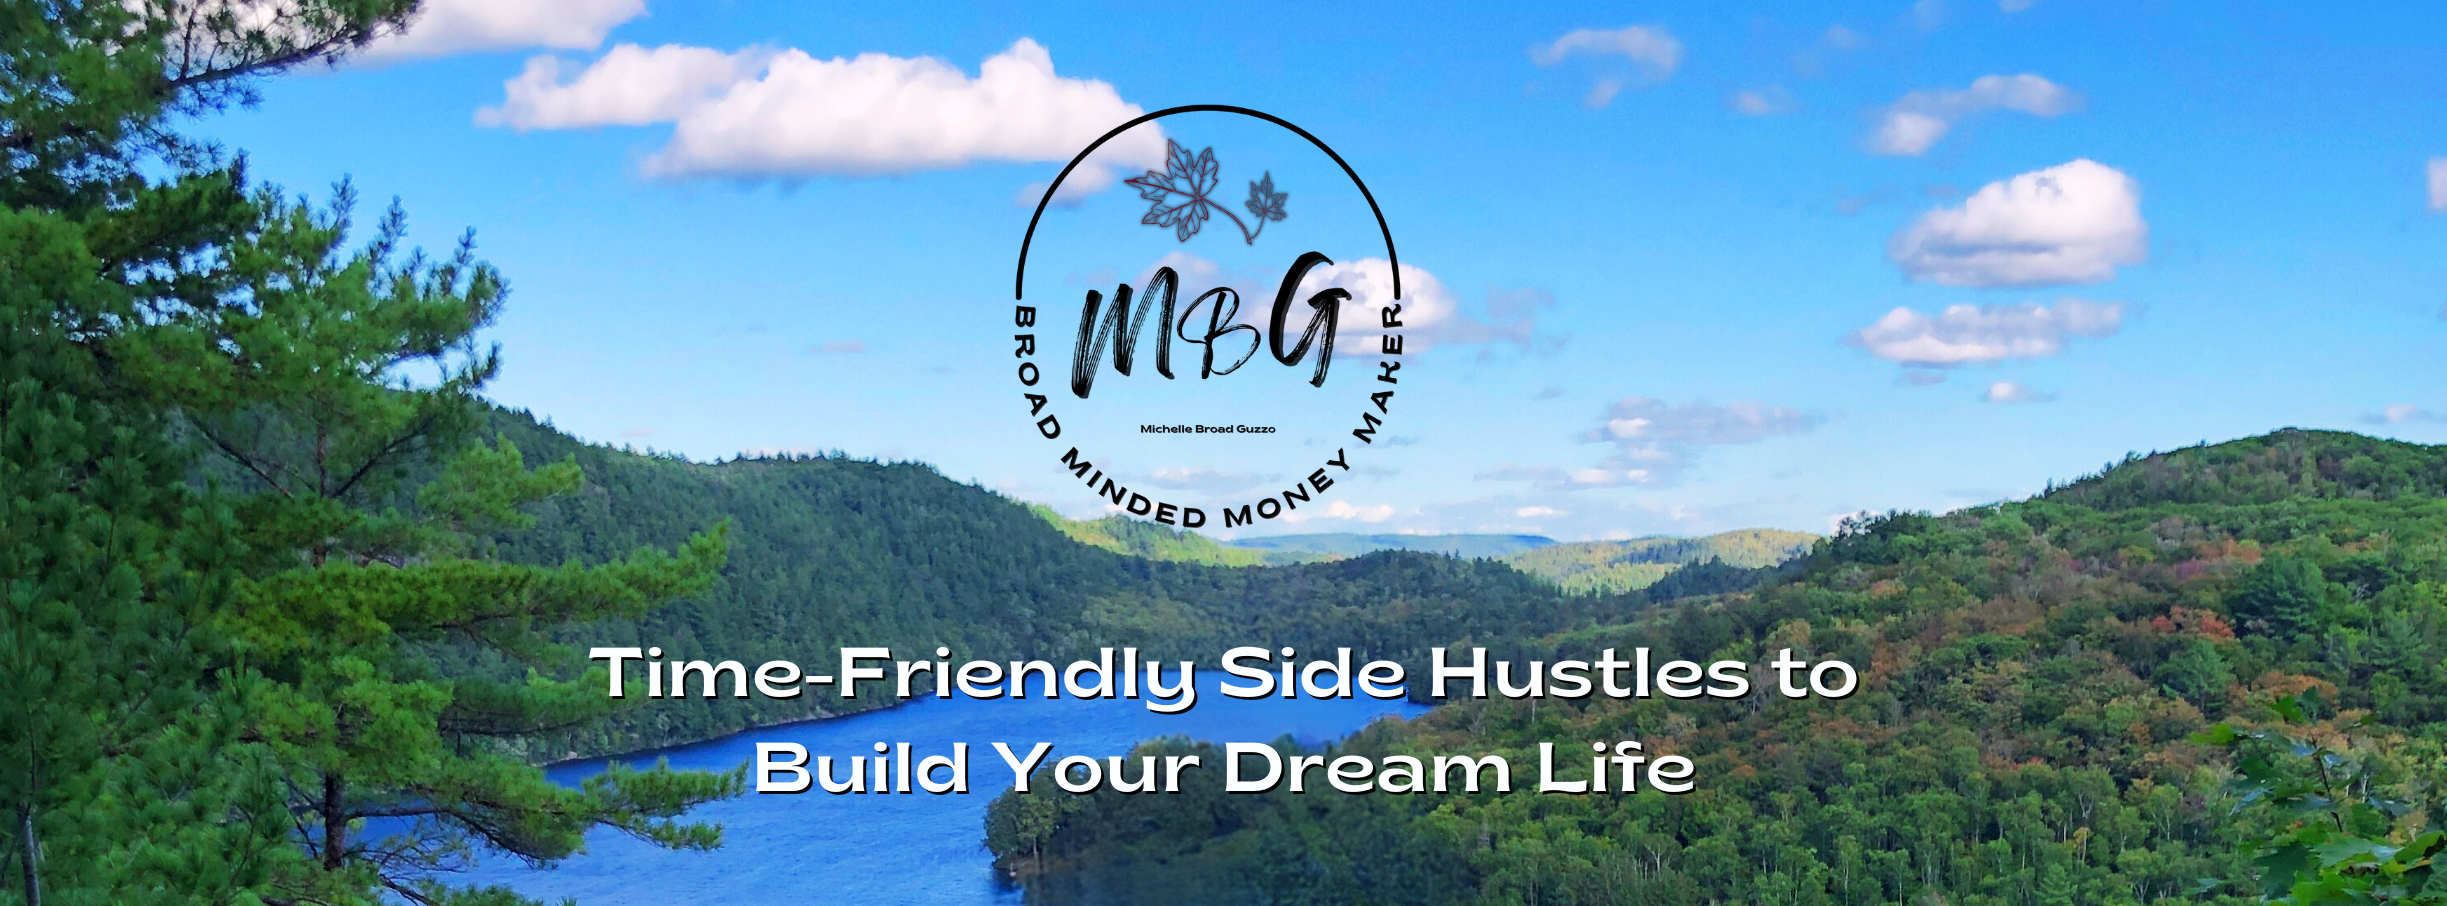 Broad Minded Money. Maker | Personally Tested Side Hustles and Online Business Tips to Help You Claim Your Dream Life